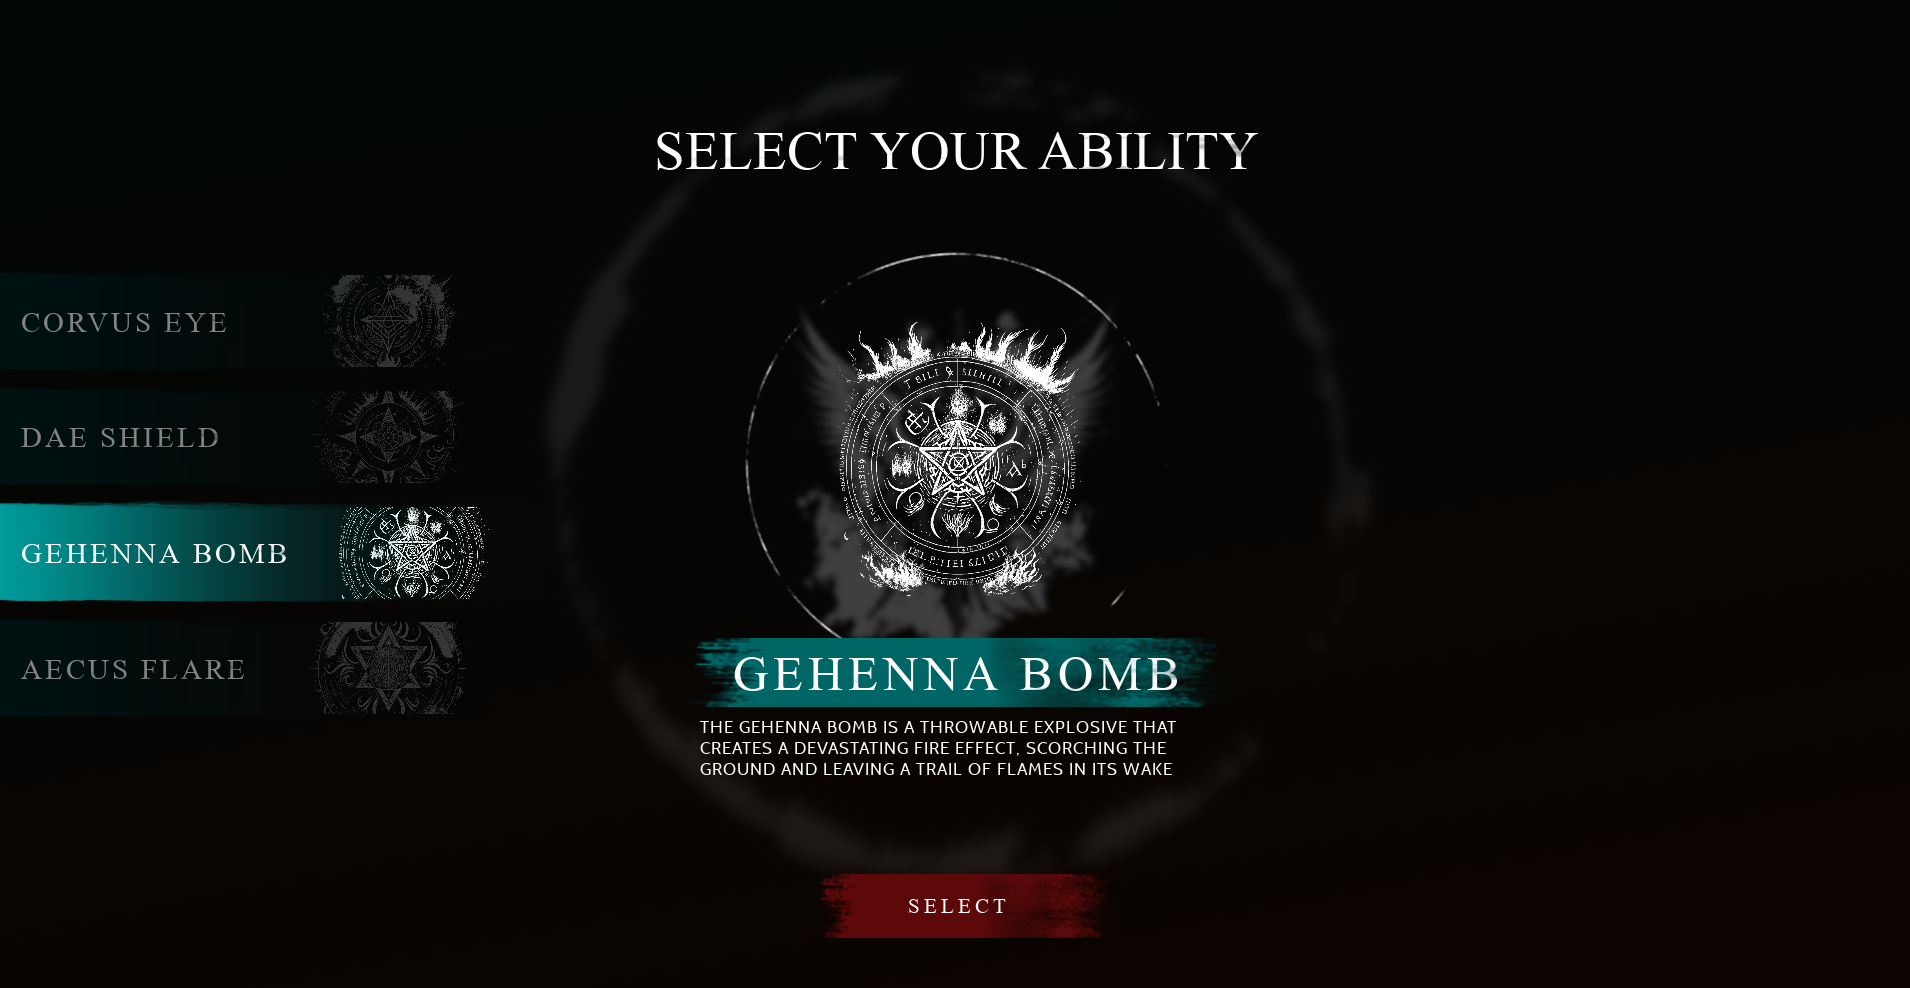 UI screen by Calum Forrester showing the ability selection screen form The Bornless, a game by Cathedral Studios